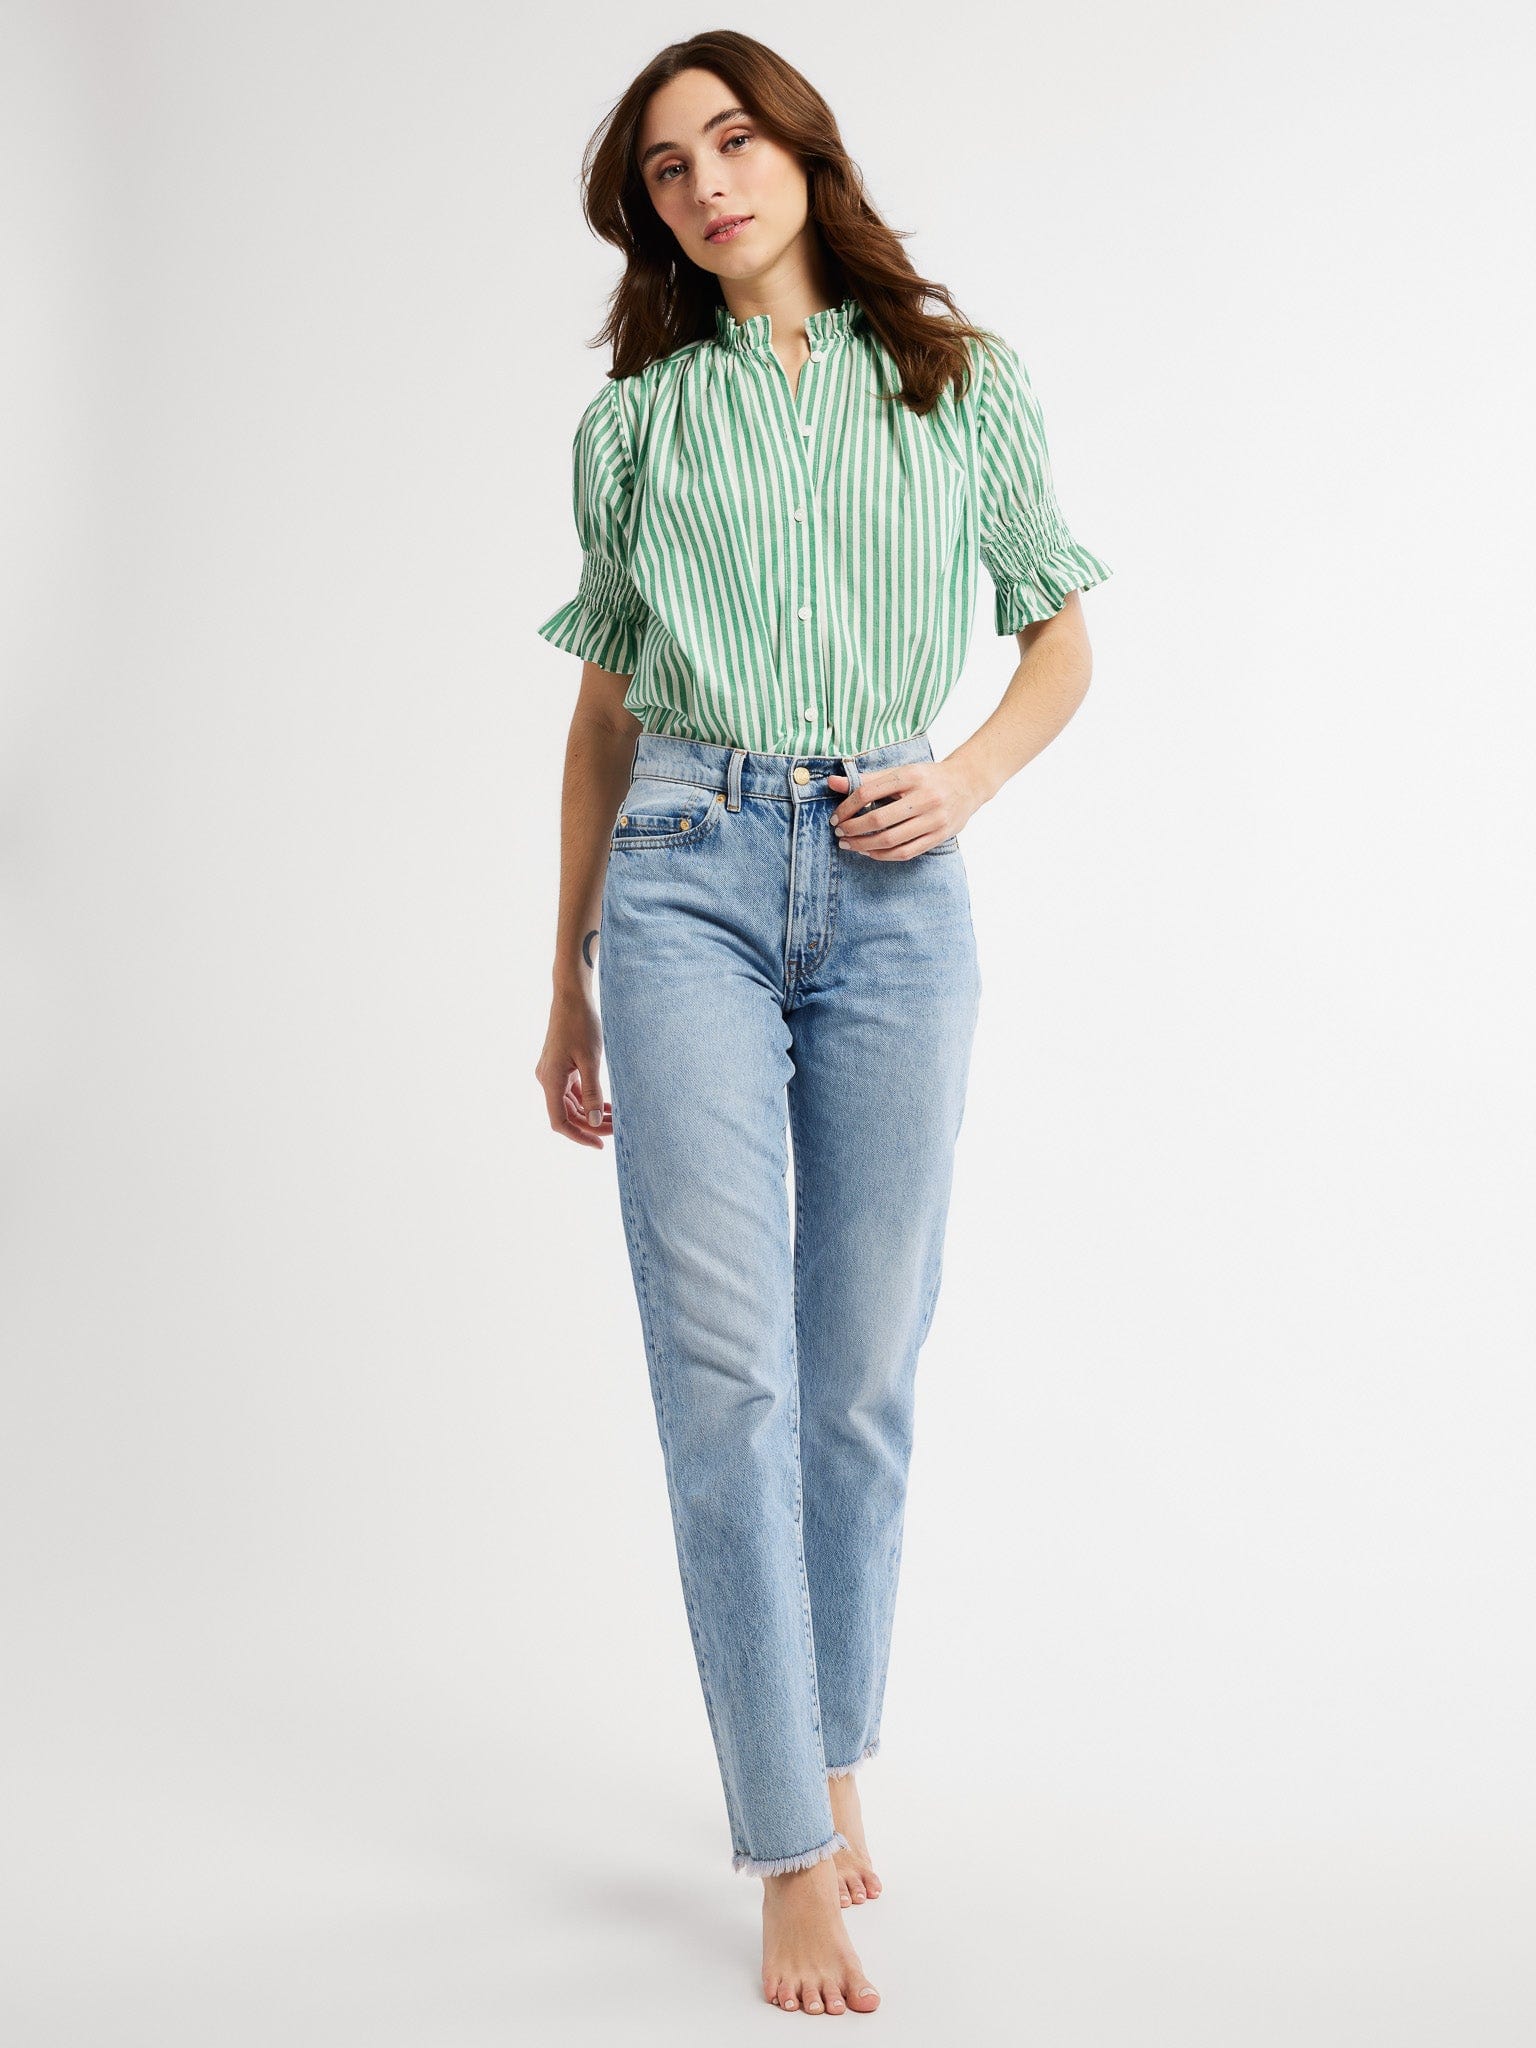 MILLE Clothing Marnie Top in Kelly Stripe